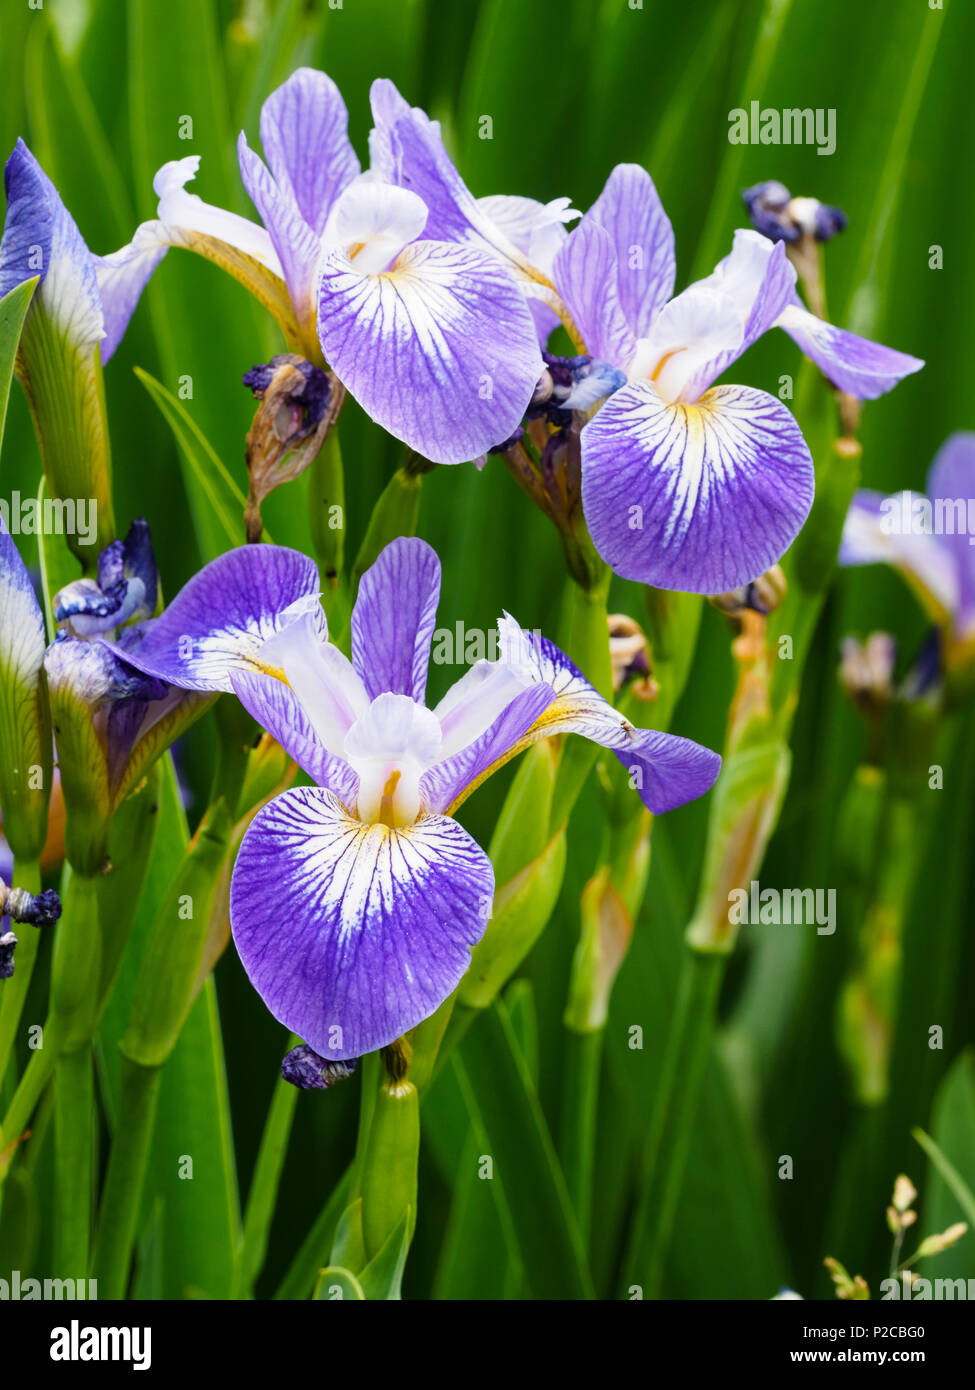 Blue and white early ummer flowers of the marginal aquatic hardy iris, Iris versicolor 'Rowden Cantata' Stock Photo